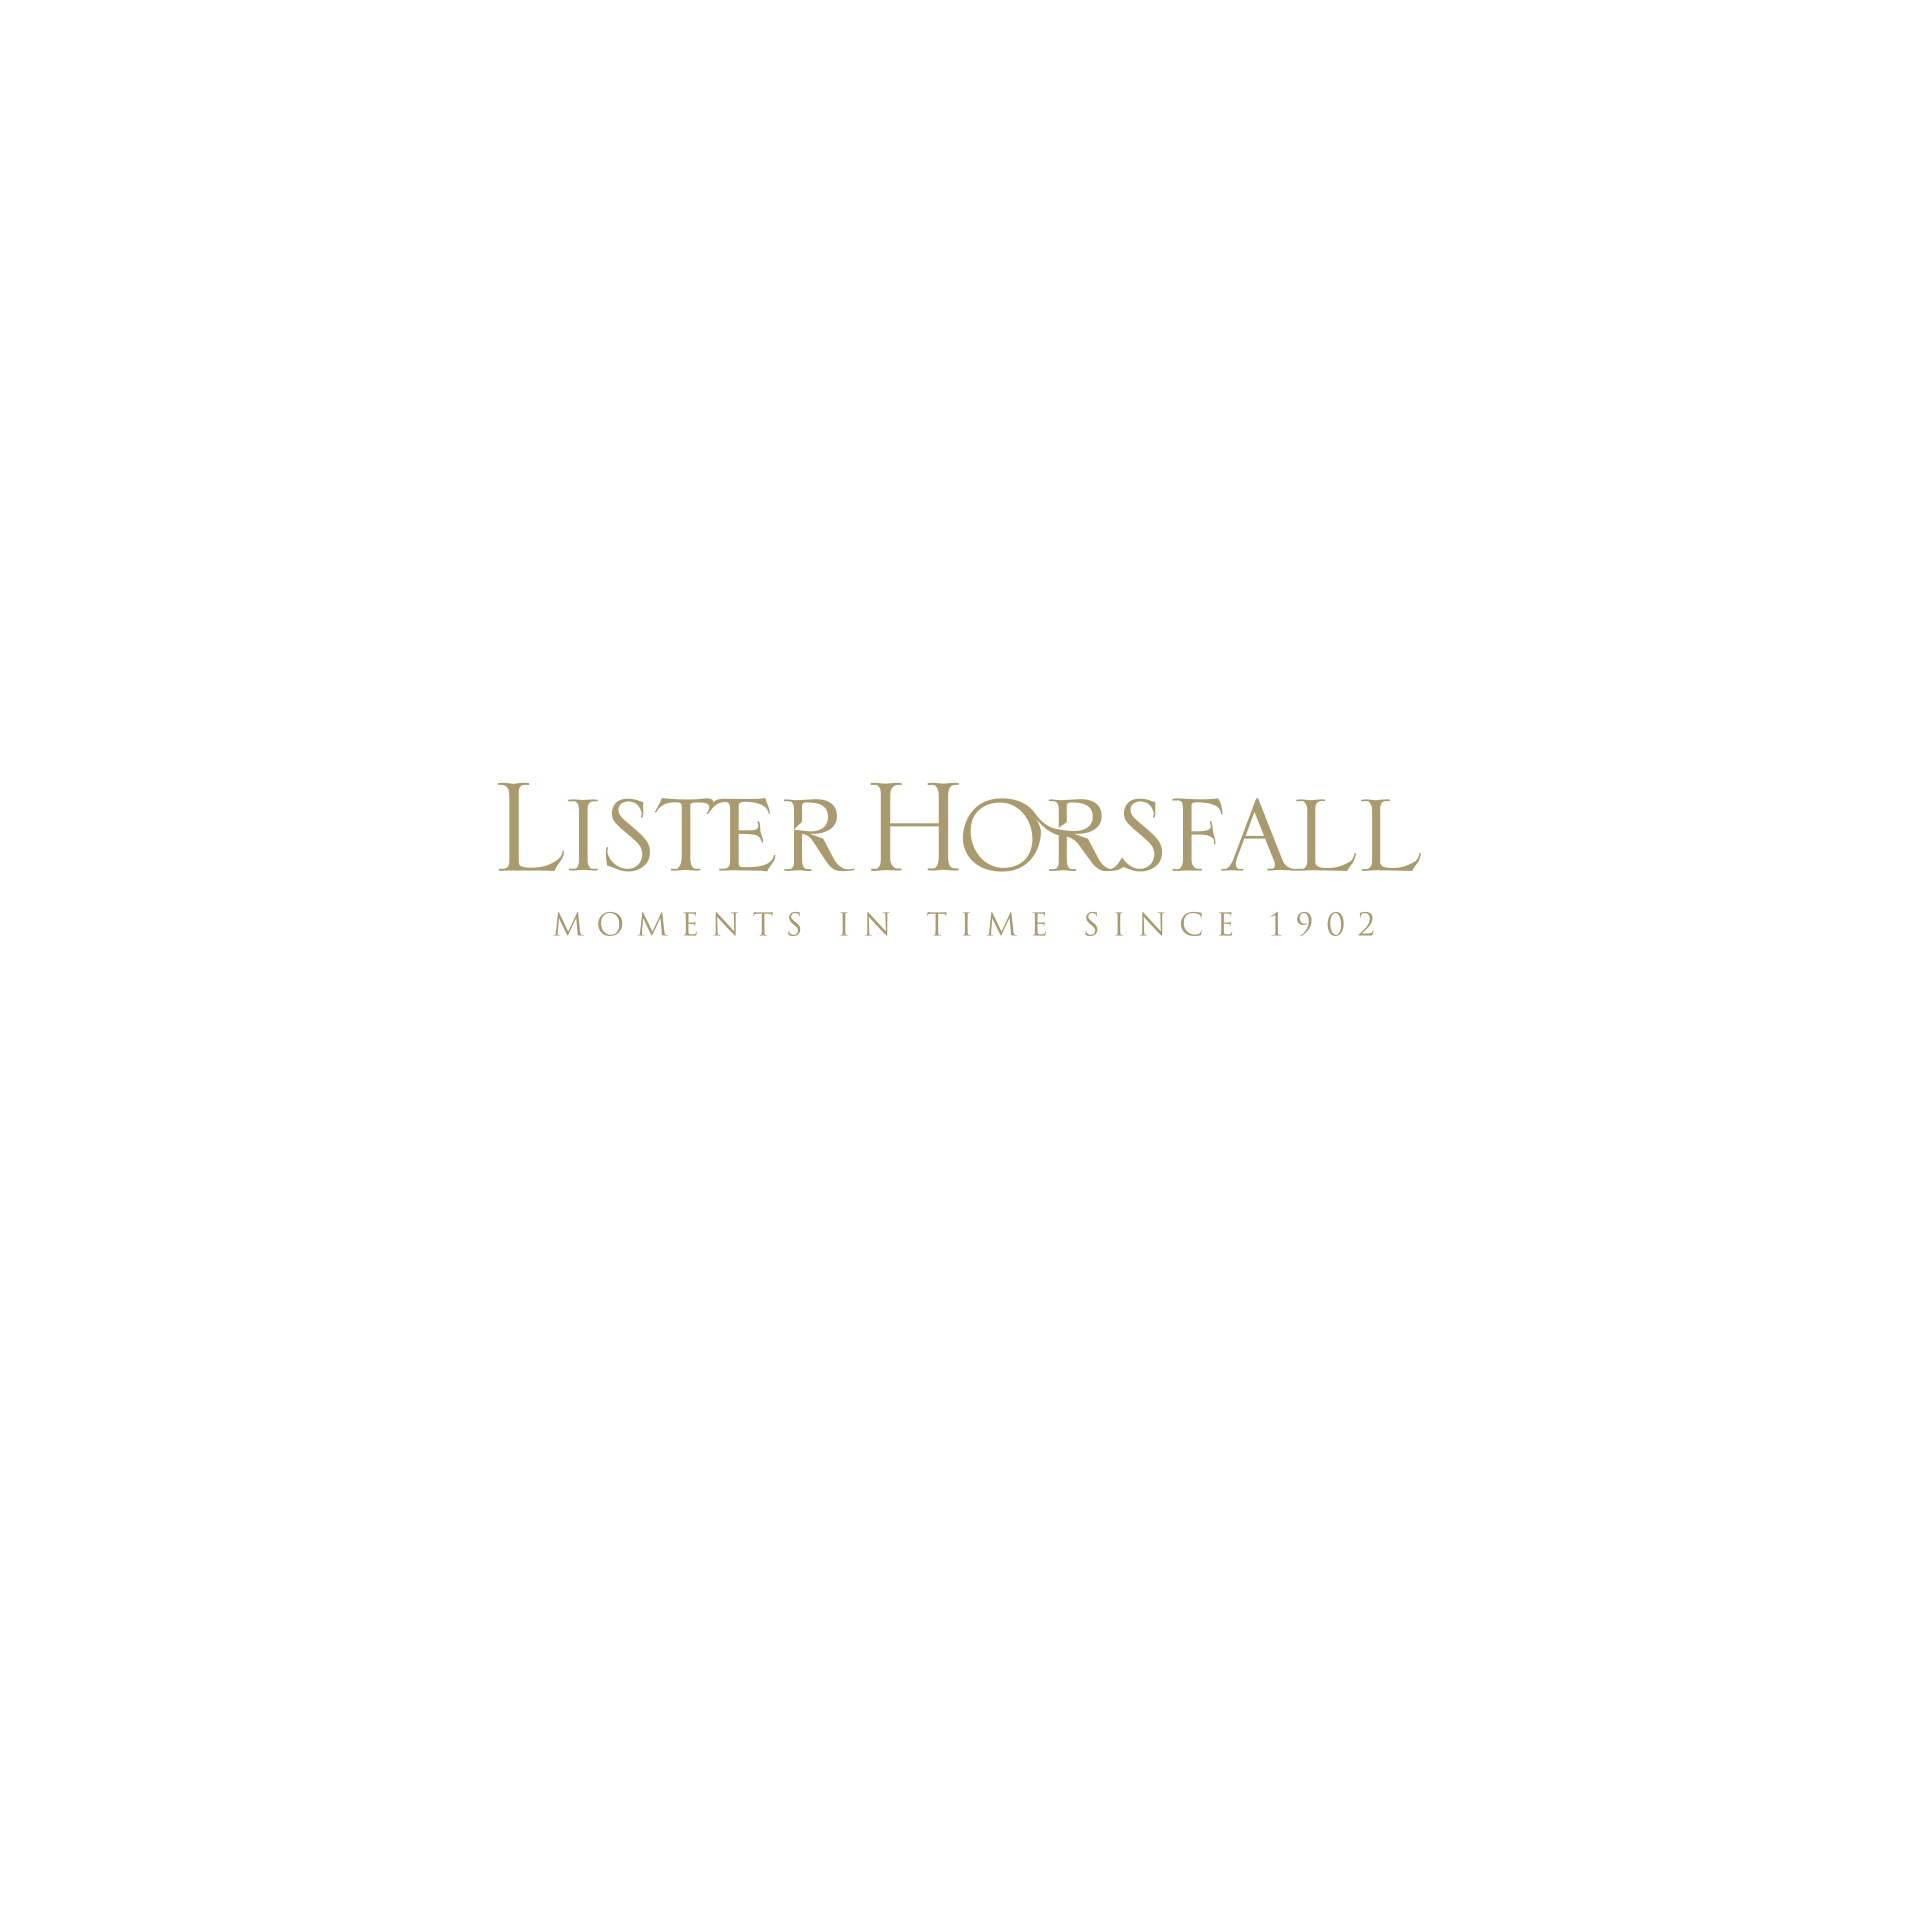 Lister Horsfall - Ilkley, West Yorkshire LS29 9EG - 01943 601406 | ShowMeLocal.com